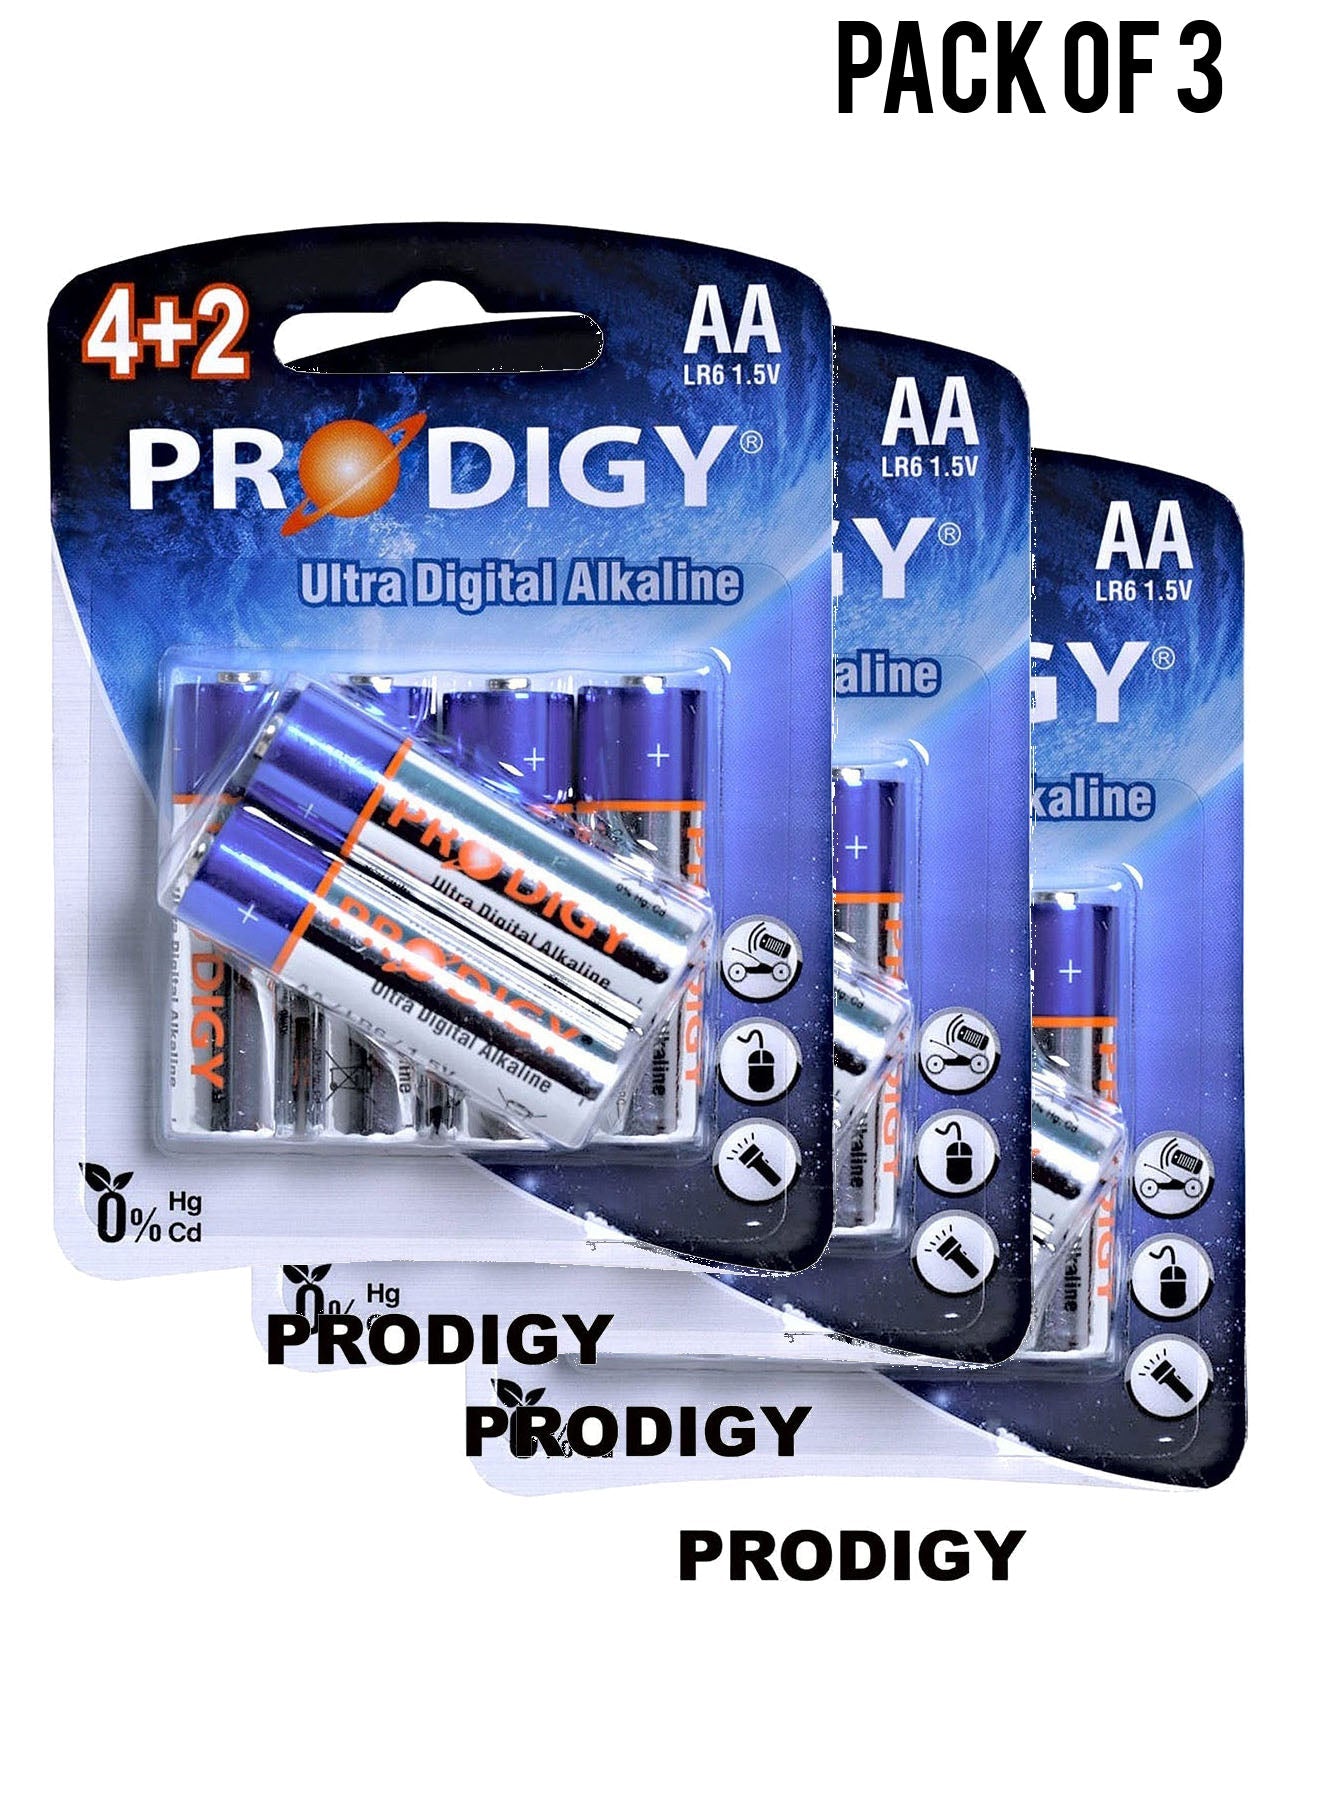 Prodigy Alkaline LR6UD 42B AA6 Value Pack of 3 